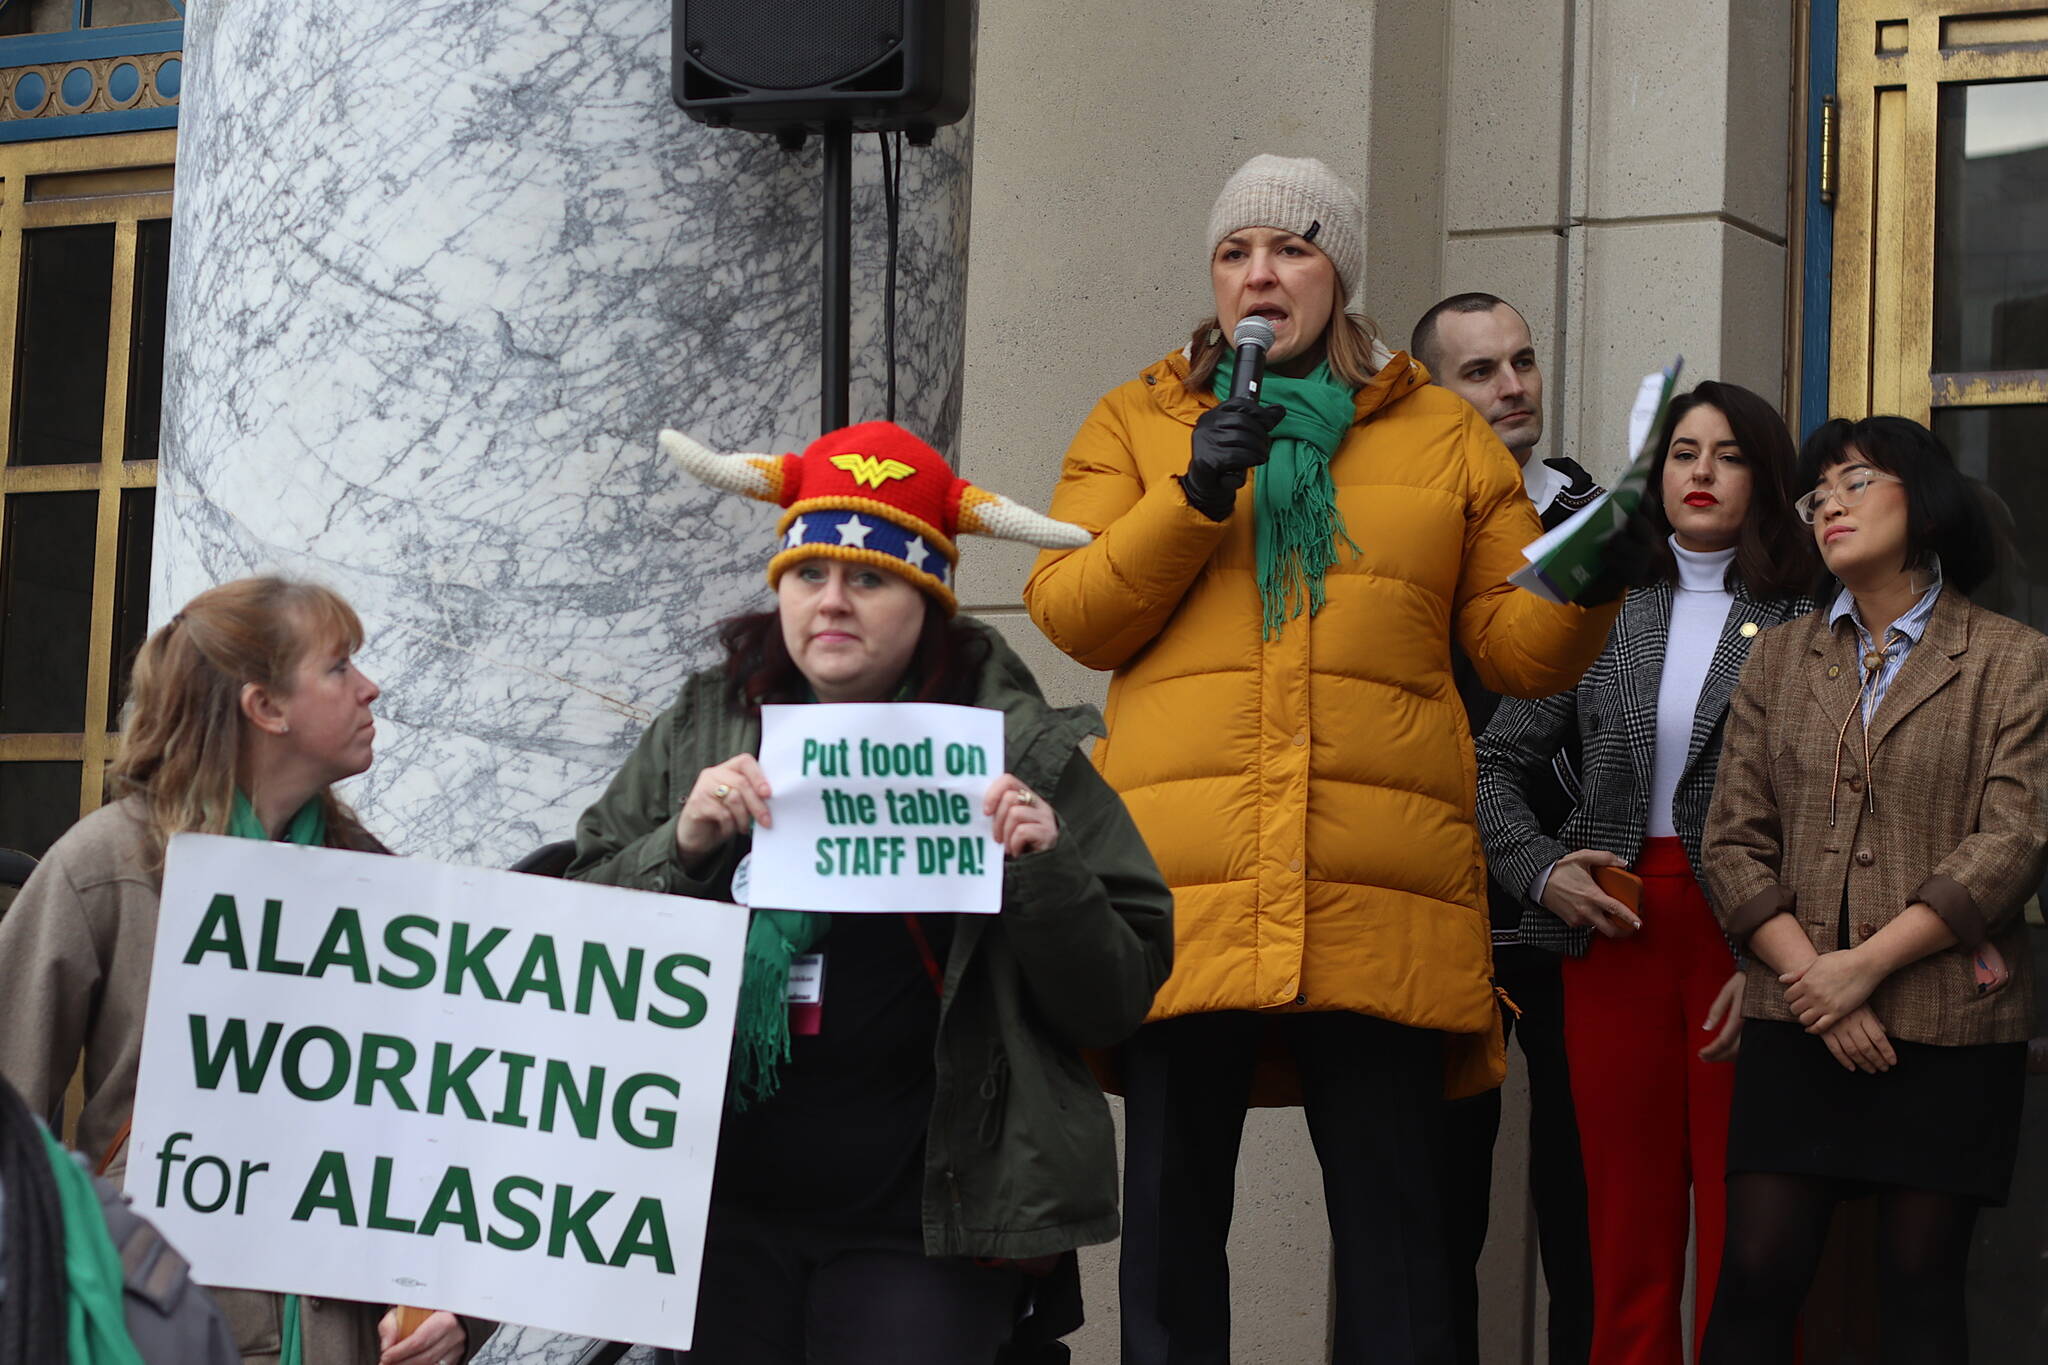 Heidi Drygas, executive director of the 8,000-member Alaska State Employees Association, addresses a rally outside the Alaska State Capitol on Friday where participants protested the workforce shortage facing various agencies including the state Division of Public Assistance. Drygas on Tuesday gave qualified support to an order by Gov. Mike Dunleavy eliminating the four-year degree requirement for most state jobs, stating it is a small part of a big issue involving poor wages, benefits and morale among employees. (Mark Sabbatini / Juneau Empire)